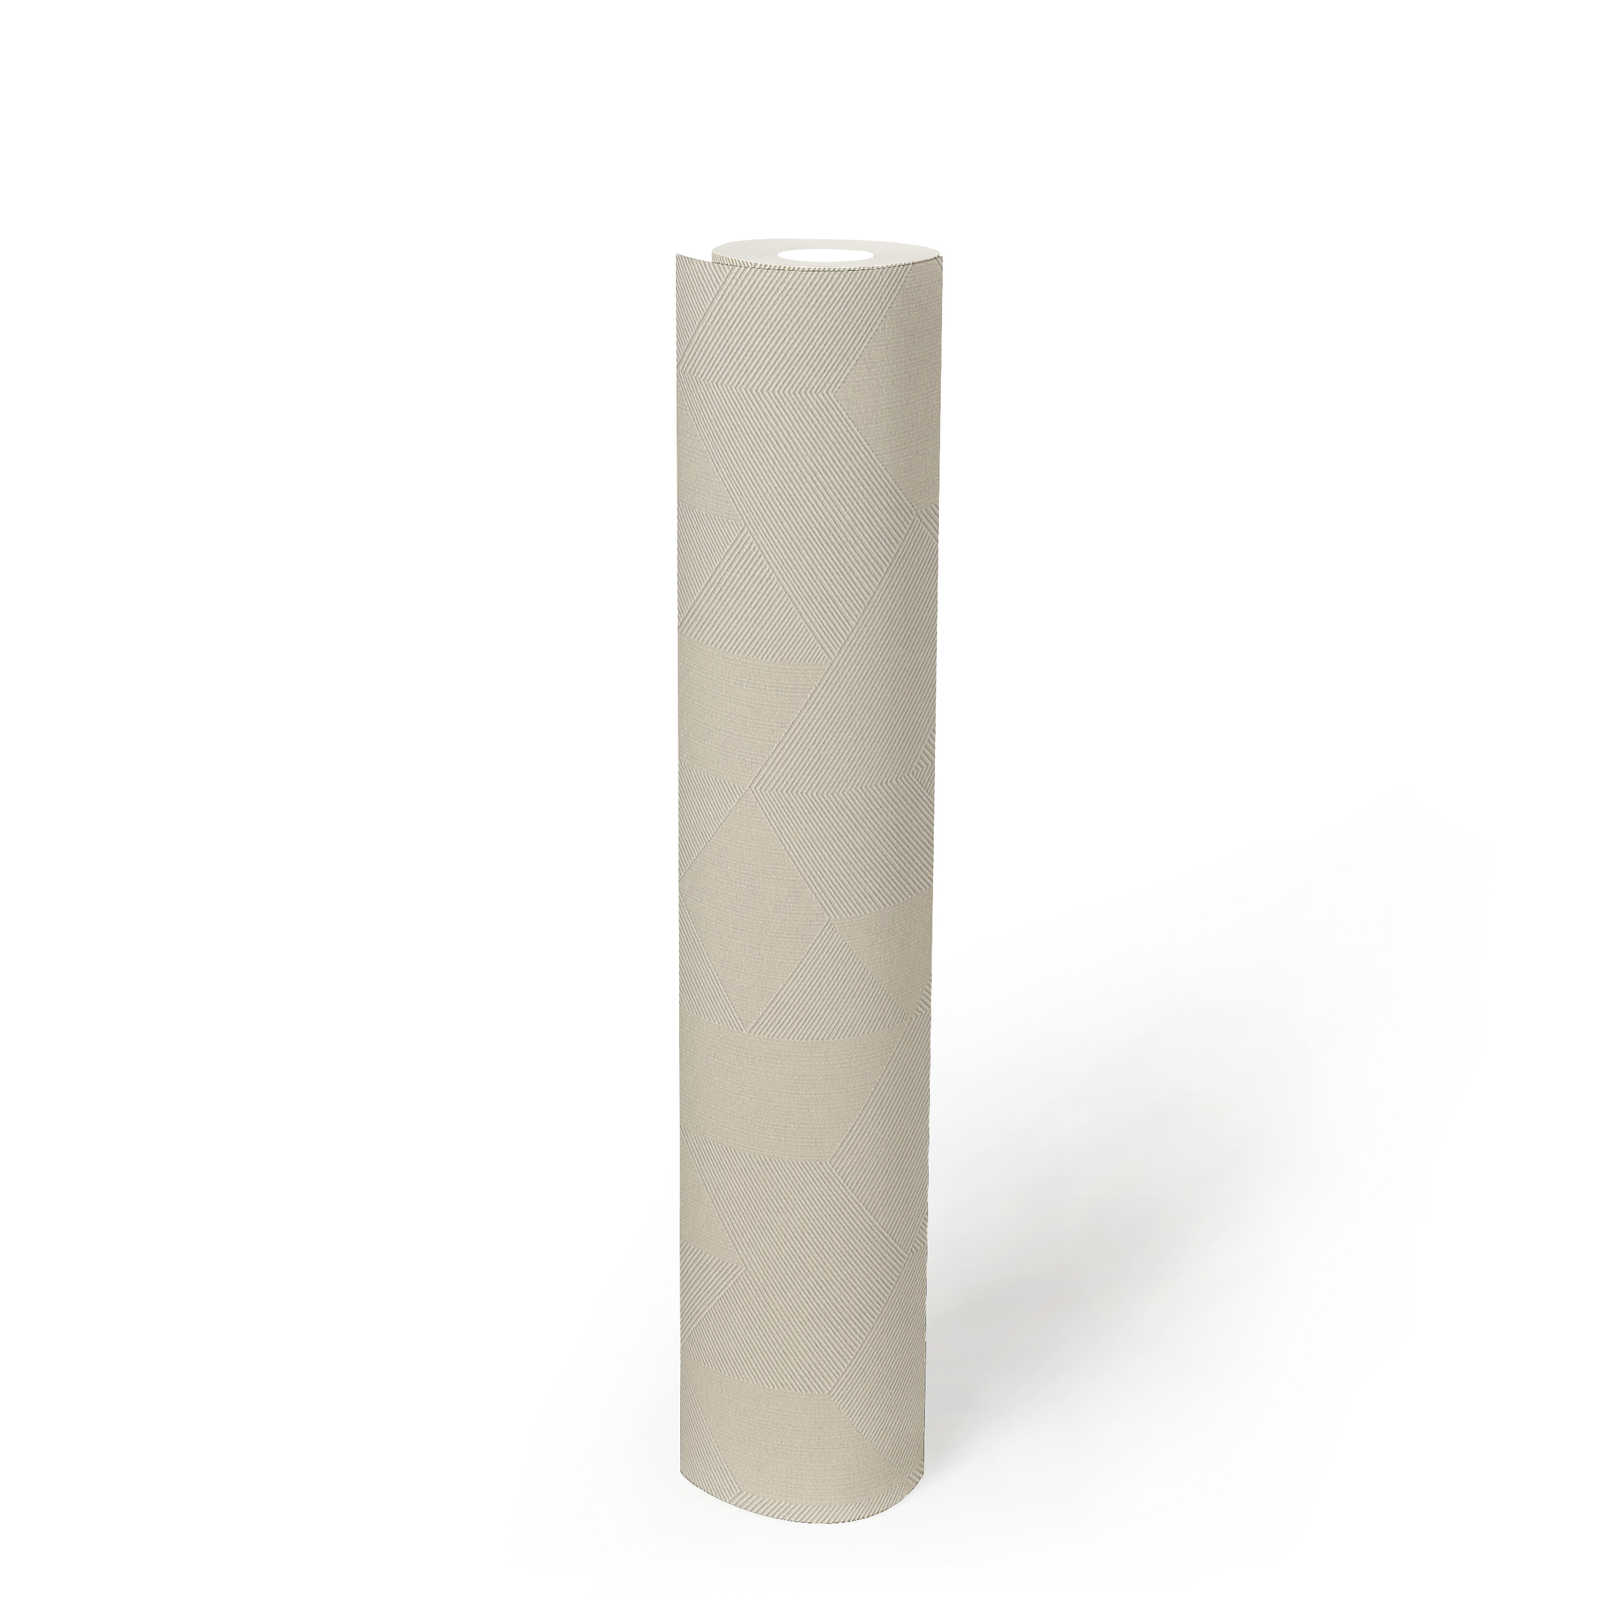             Cream white wallpaper with tone-on-tone pattern & shimmer effect - white
        